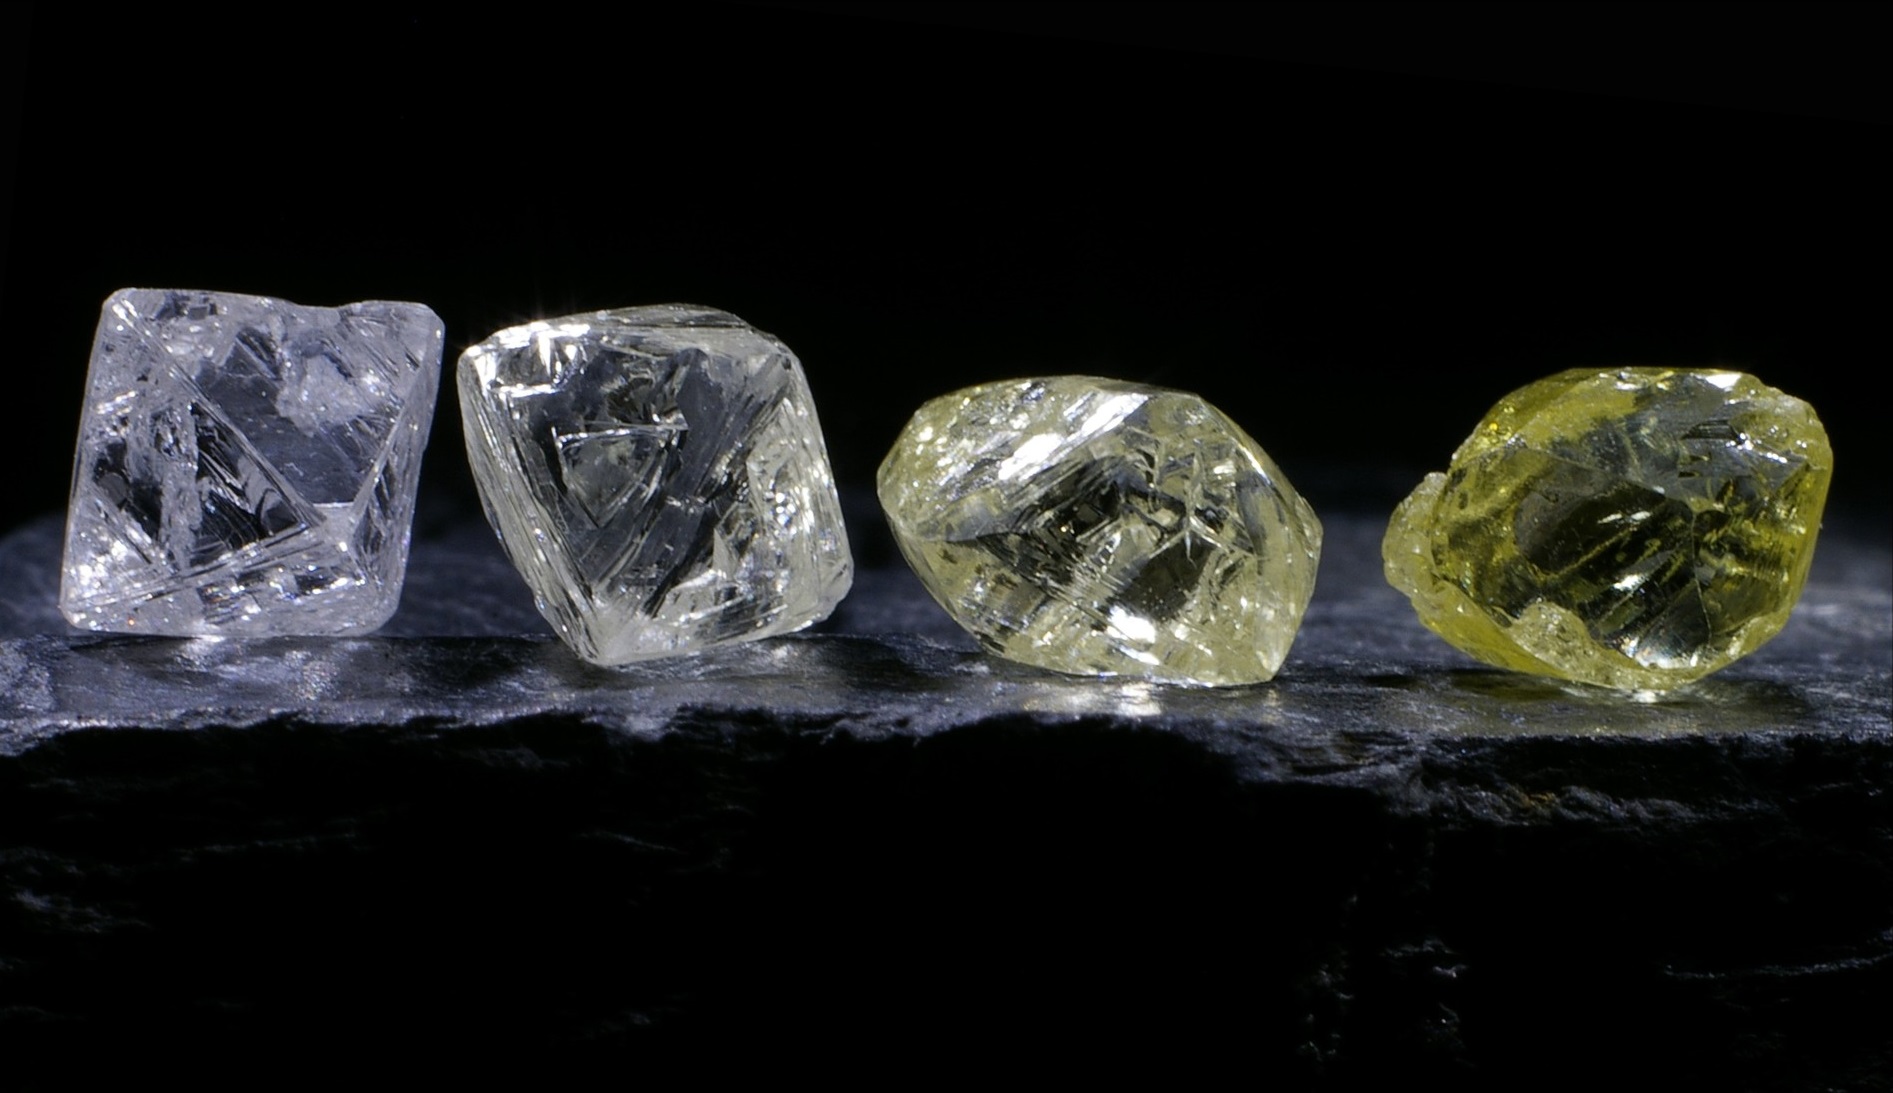 Four diamonds arranged in a row by colour, from colourless to yellow